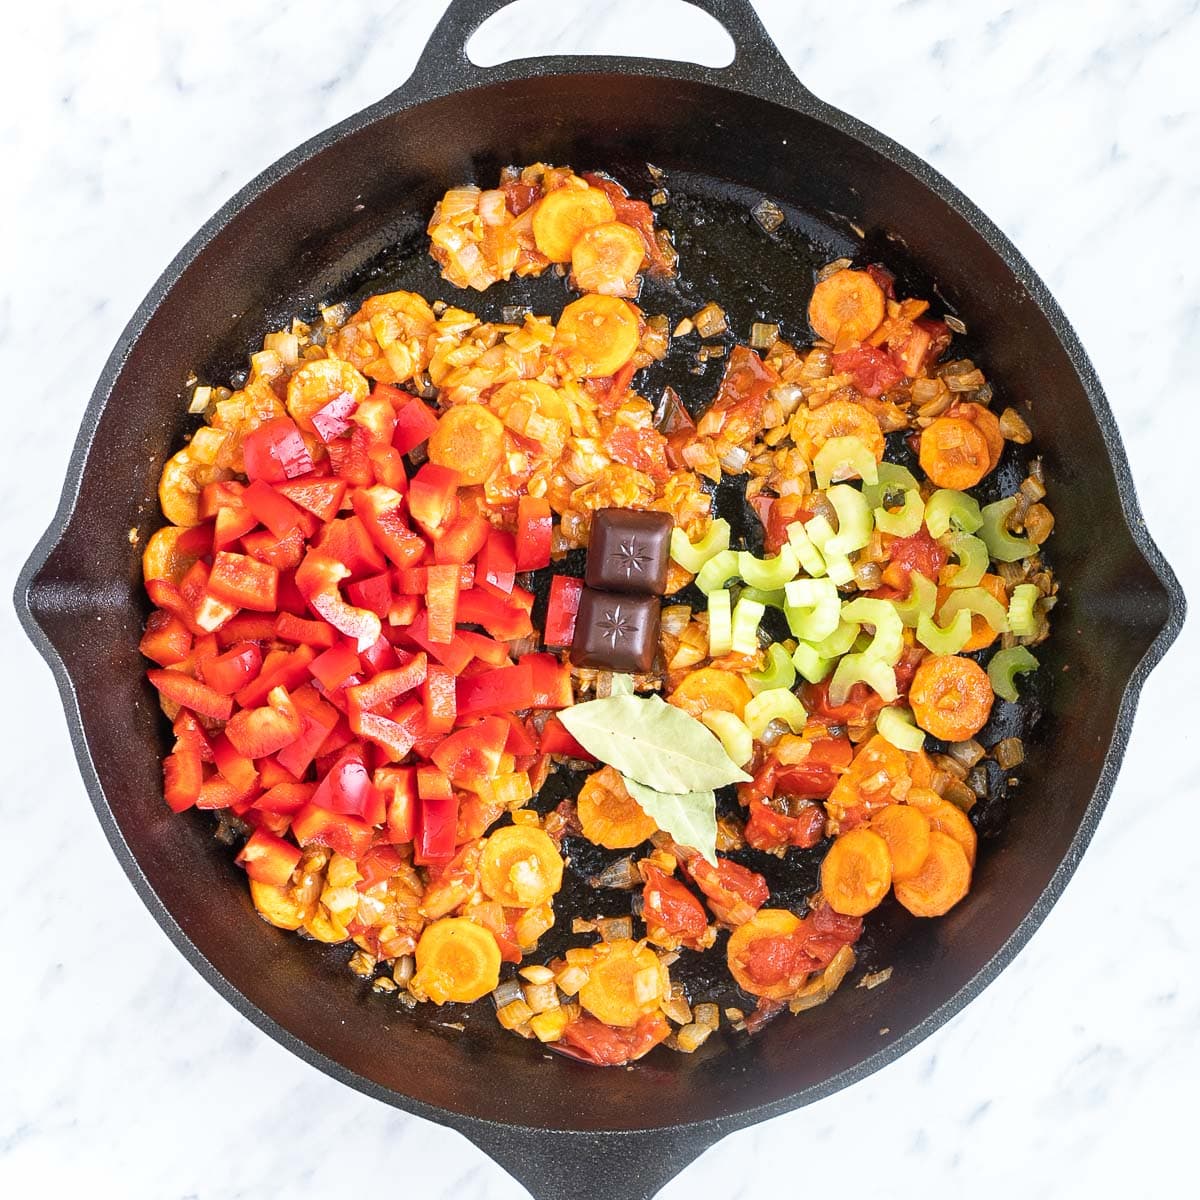 Cast iron skillet with chopped onion, sliced carrots, chopped tomatoes, celery, chocolate cubes, bay leaves, and chopped red peppers.